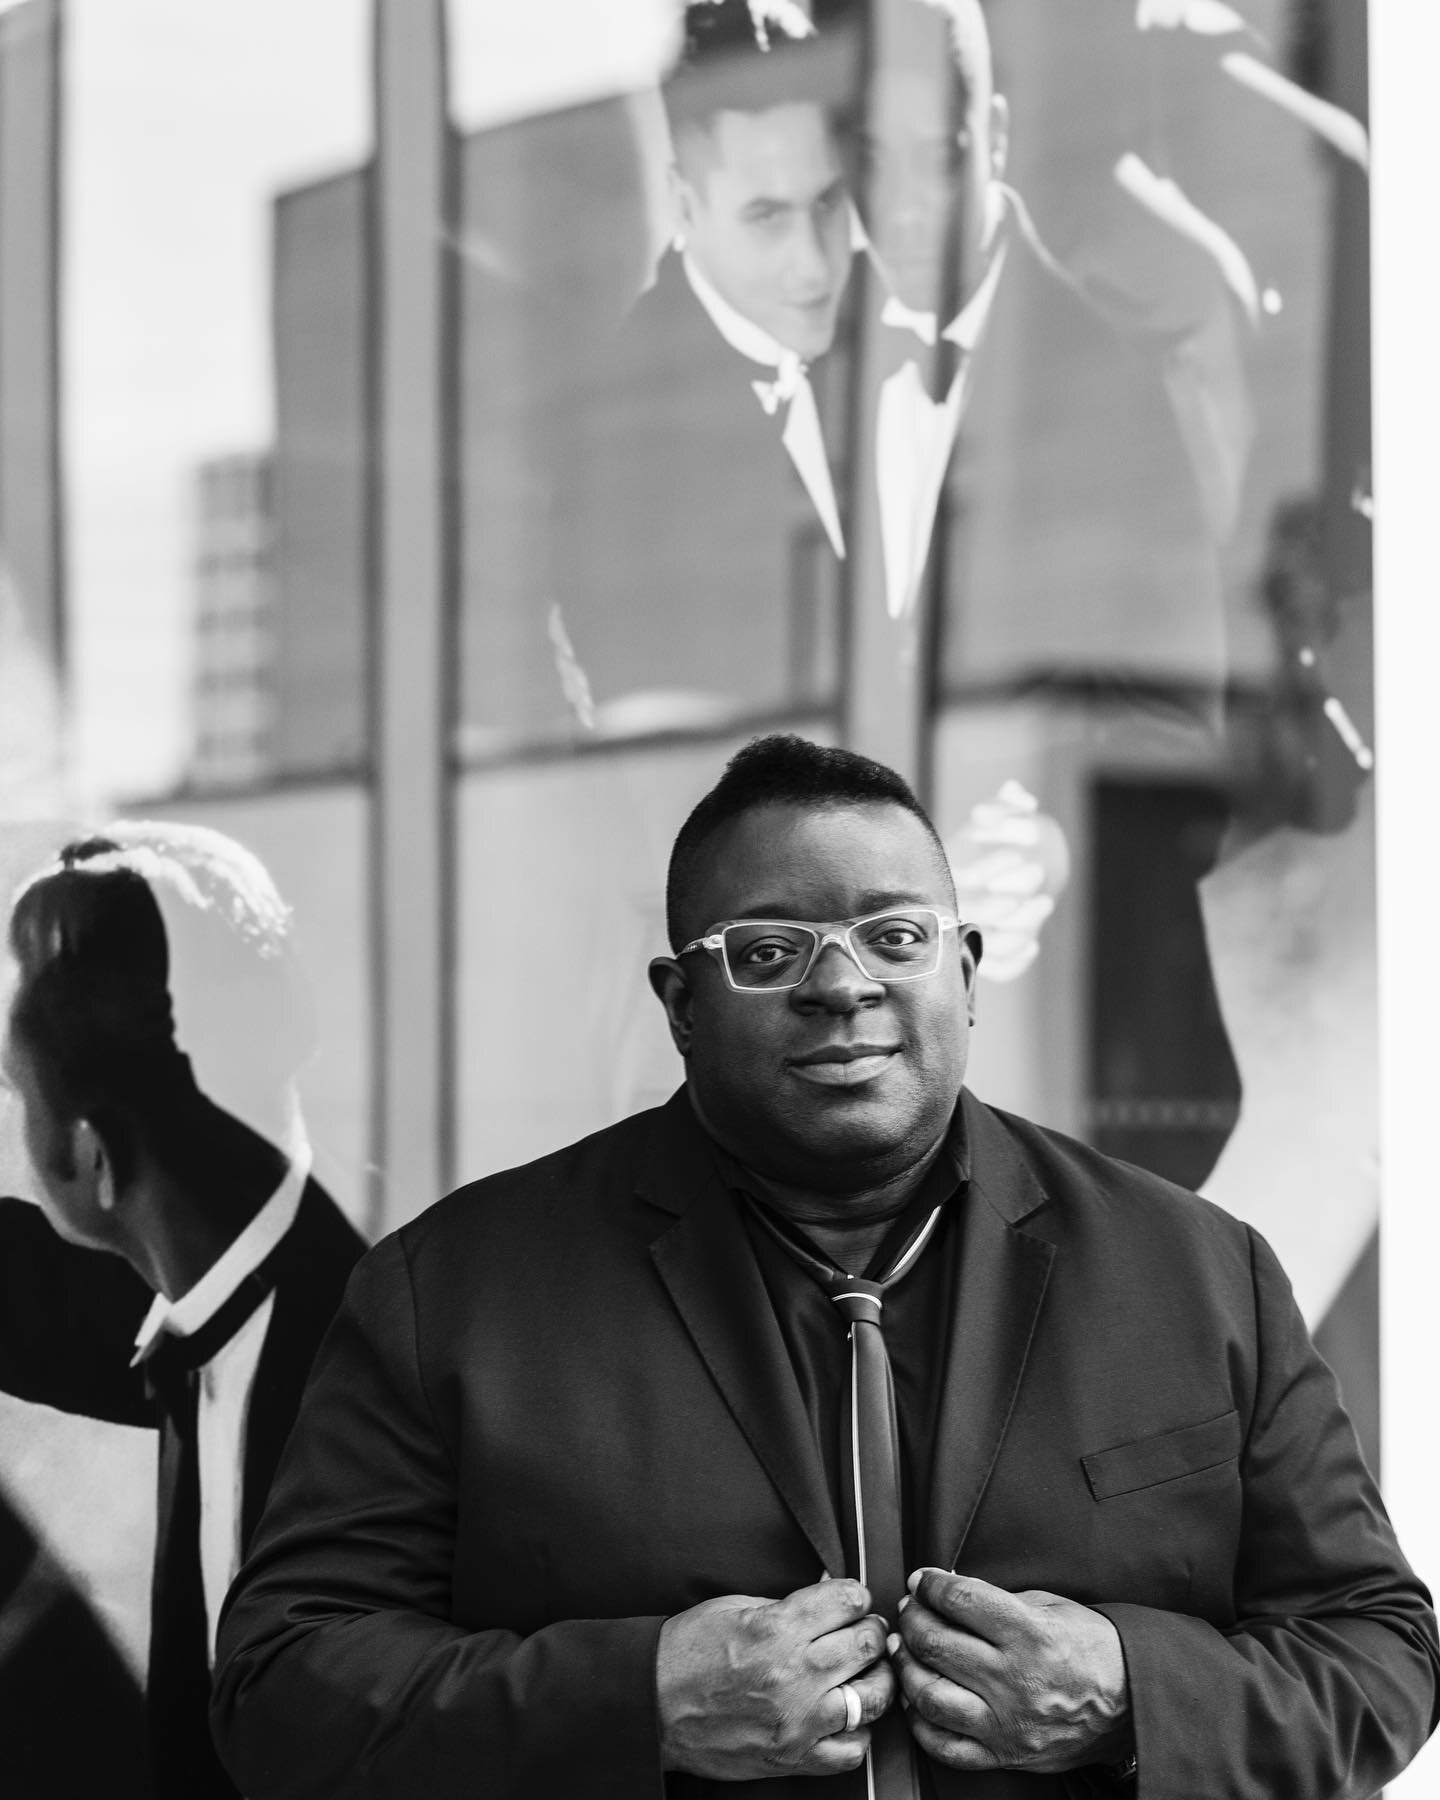 We are excited to reveal Isaac Julien and Mark Nash as guest filmmakers in this year's seminar! 

Isaac Julien (he/him)-Artist and filmmaker, Isaac Julien CBE RA, was born in 1960 in London. His multi-screen film installations and photographs incorpo